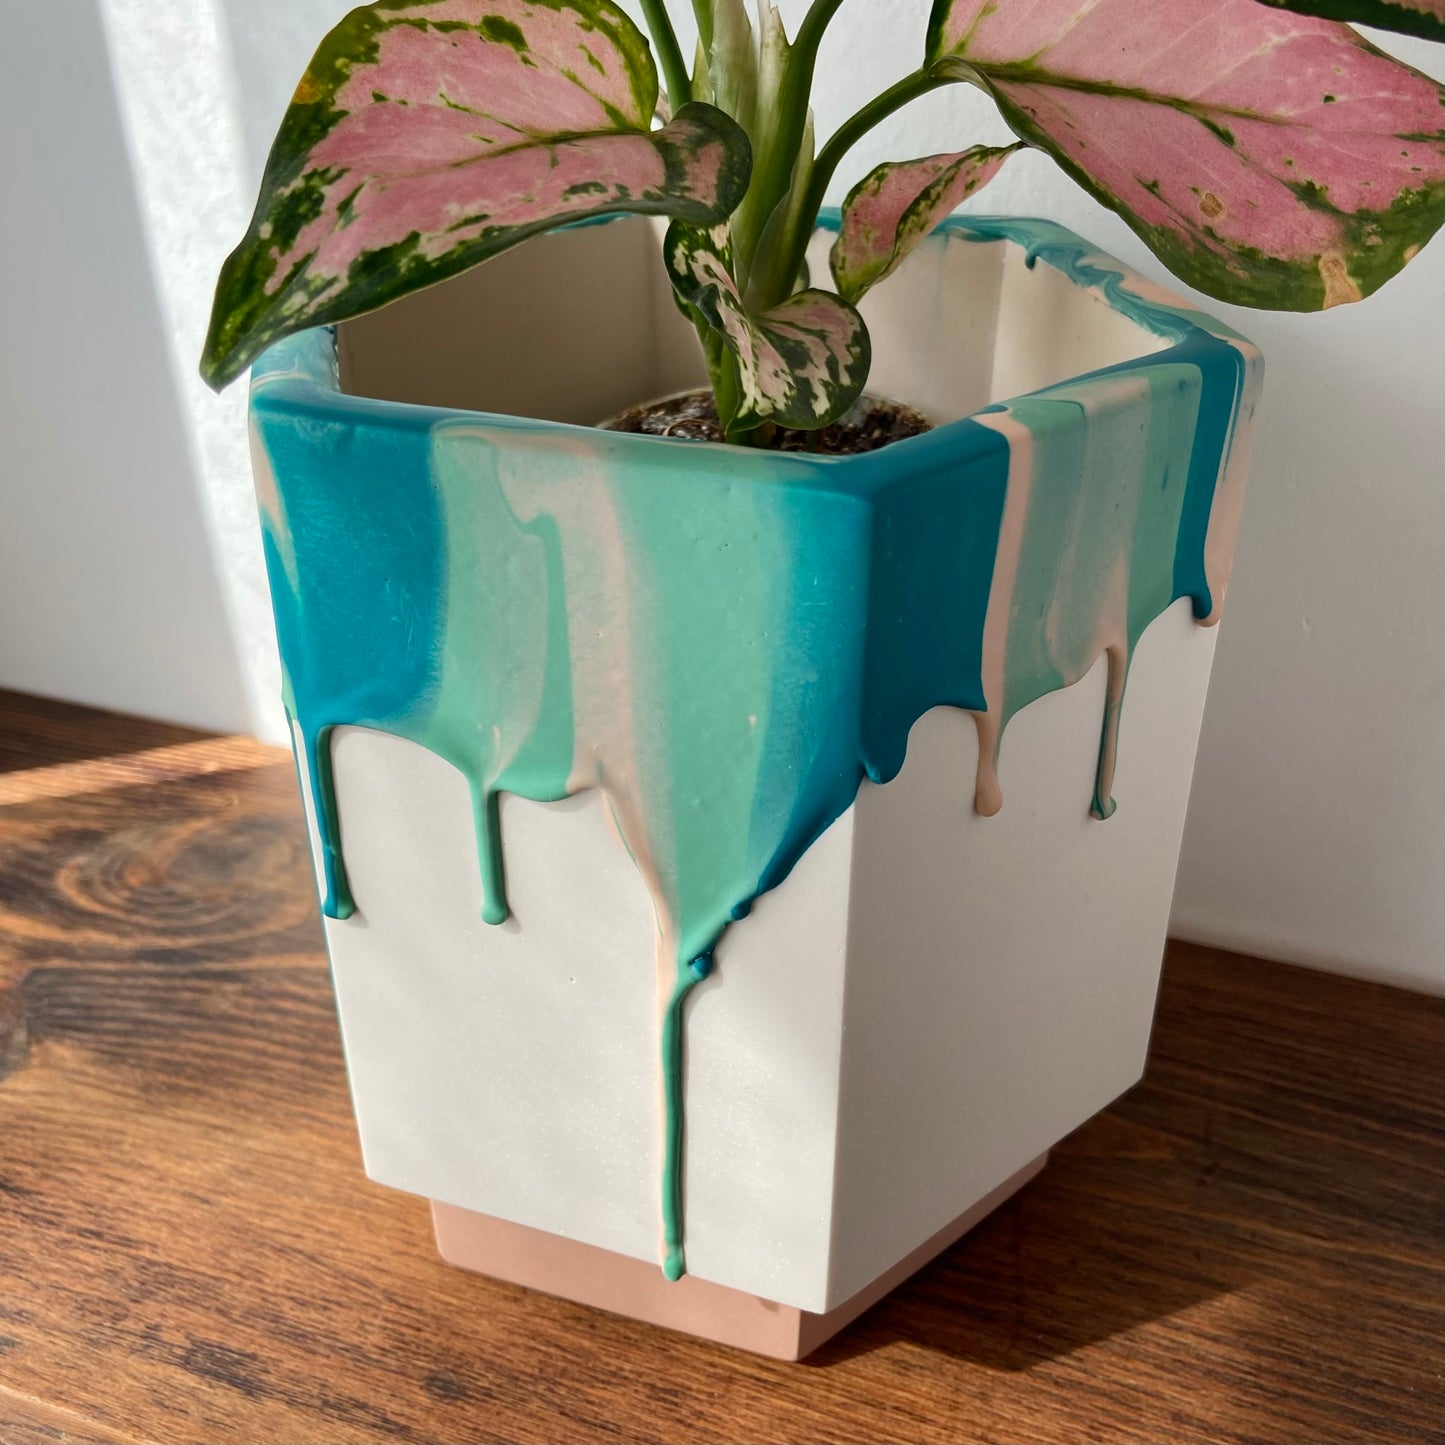 Large drippy plant pot in pink + marbled teal